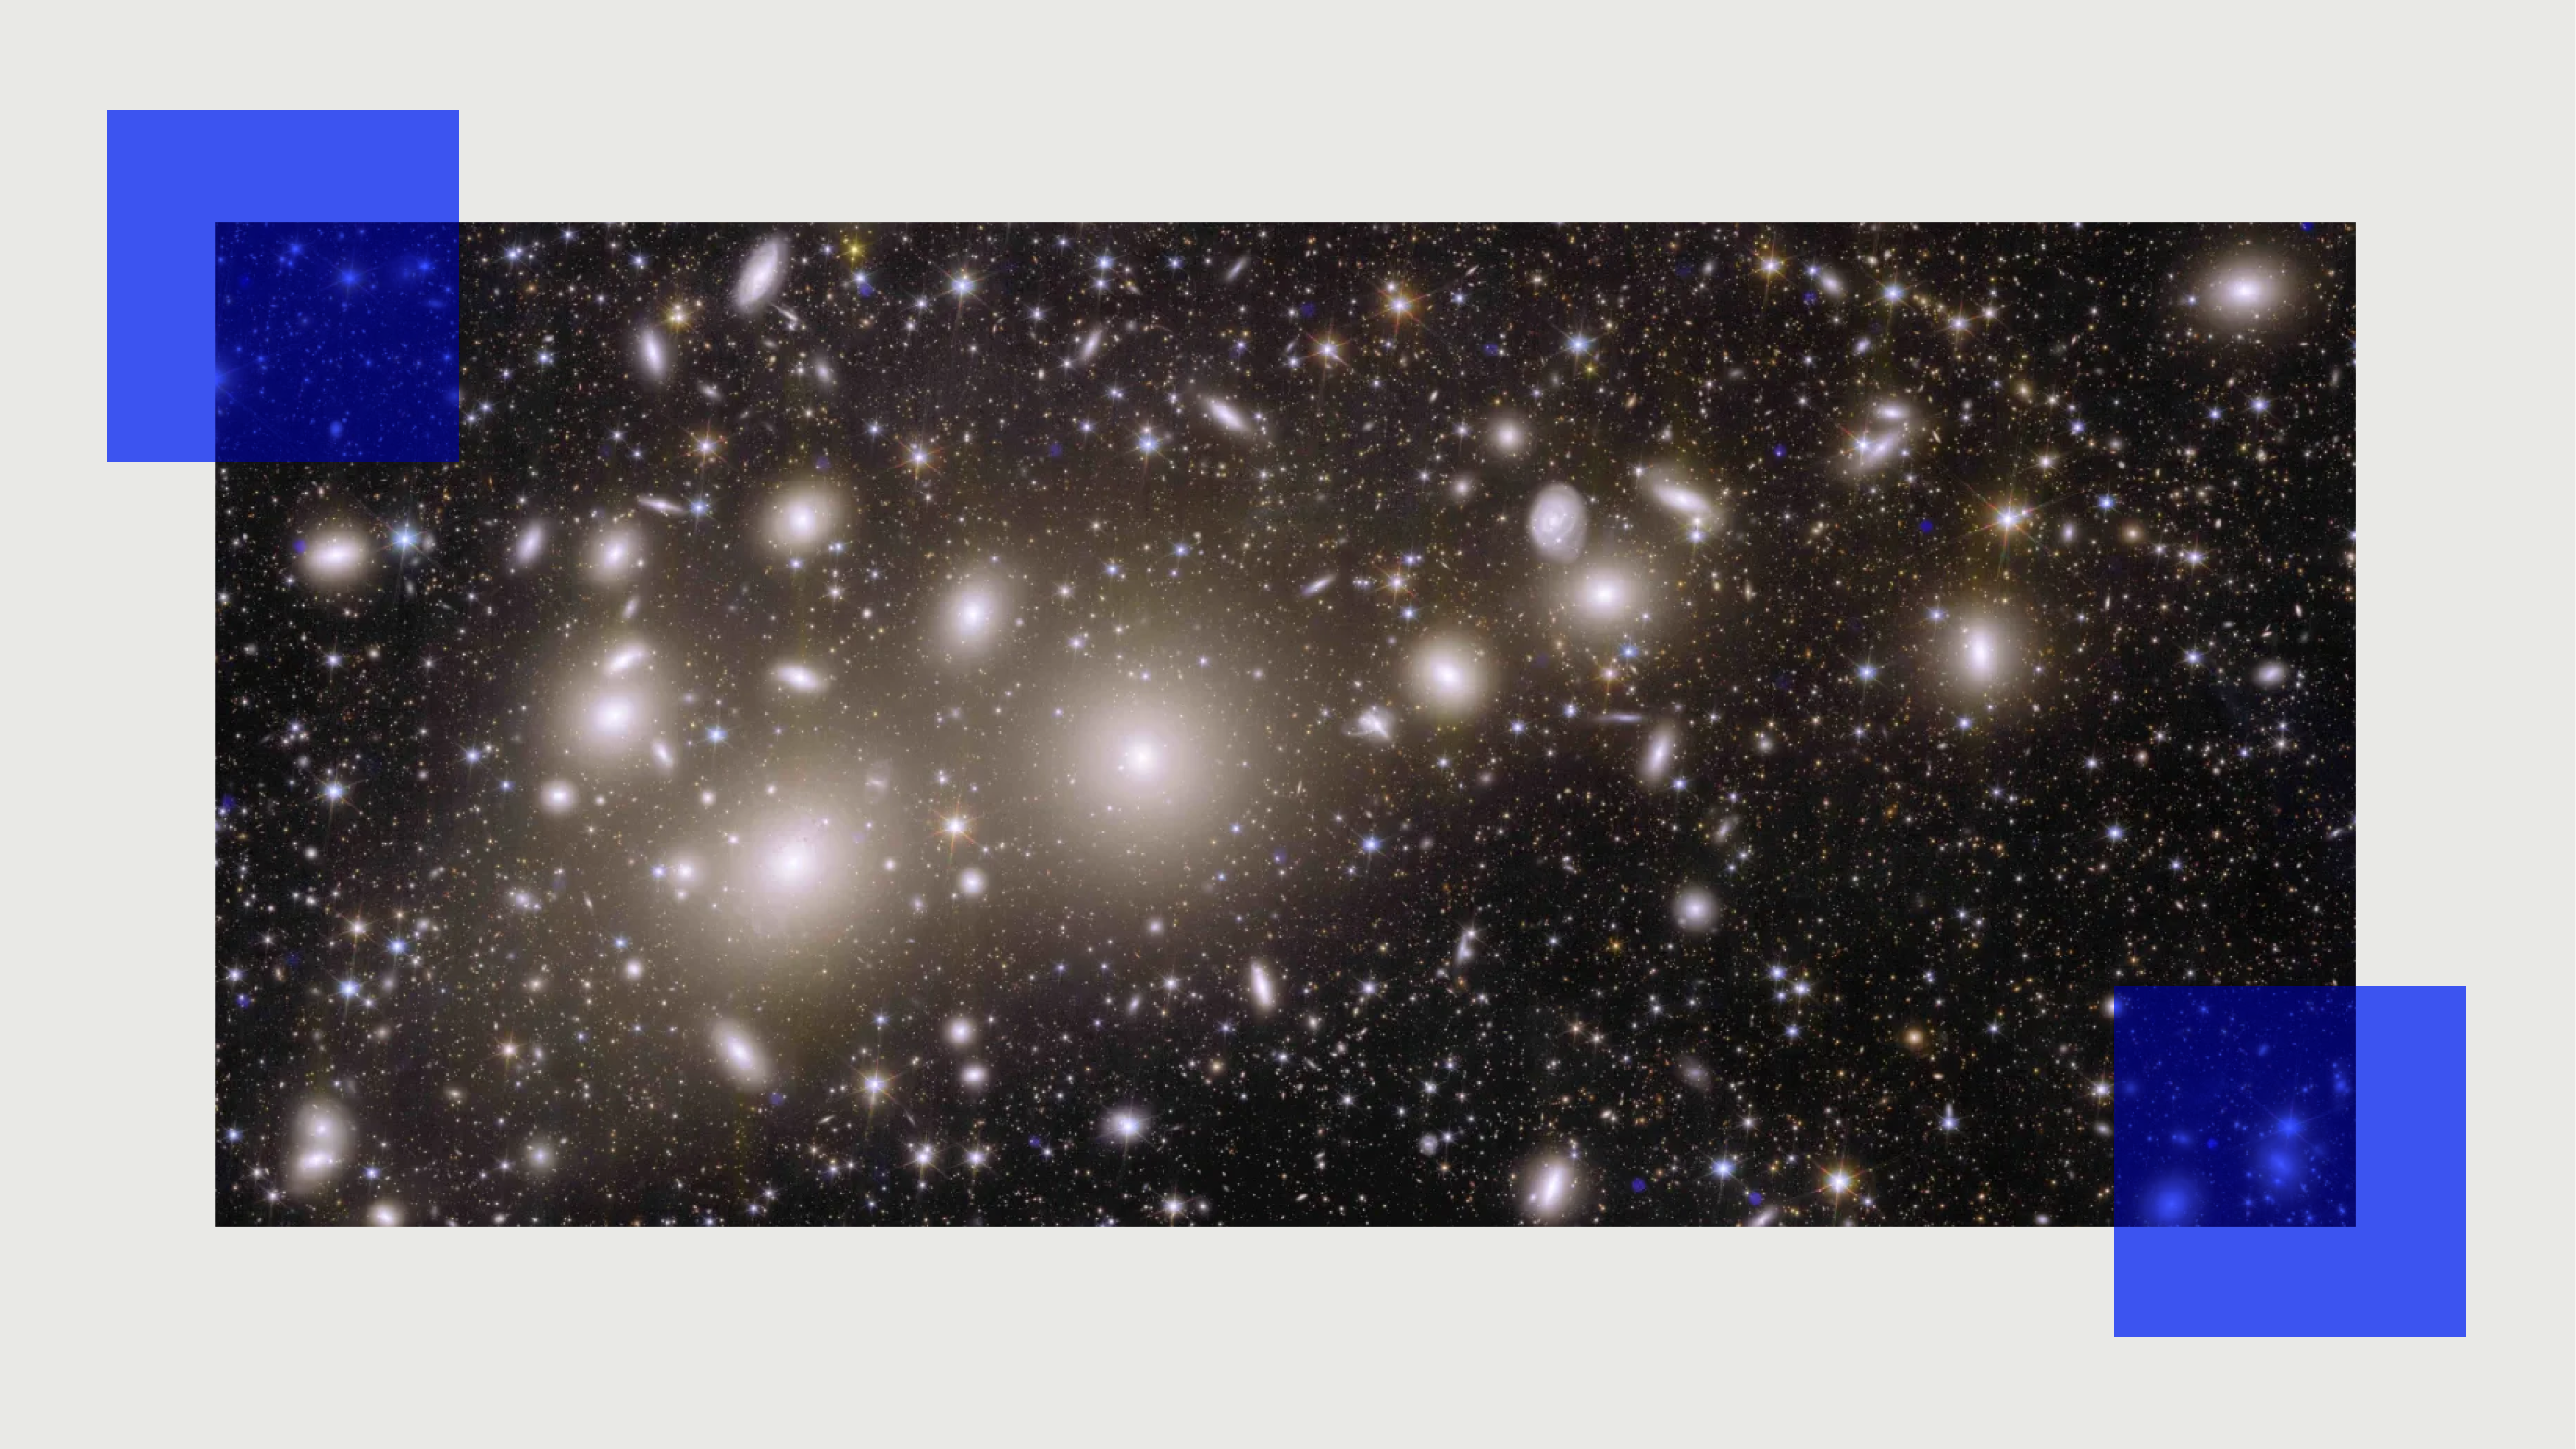 An image of a galaxy cluster.